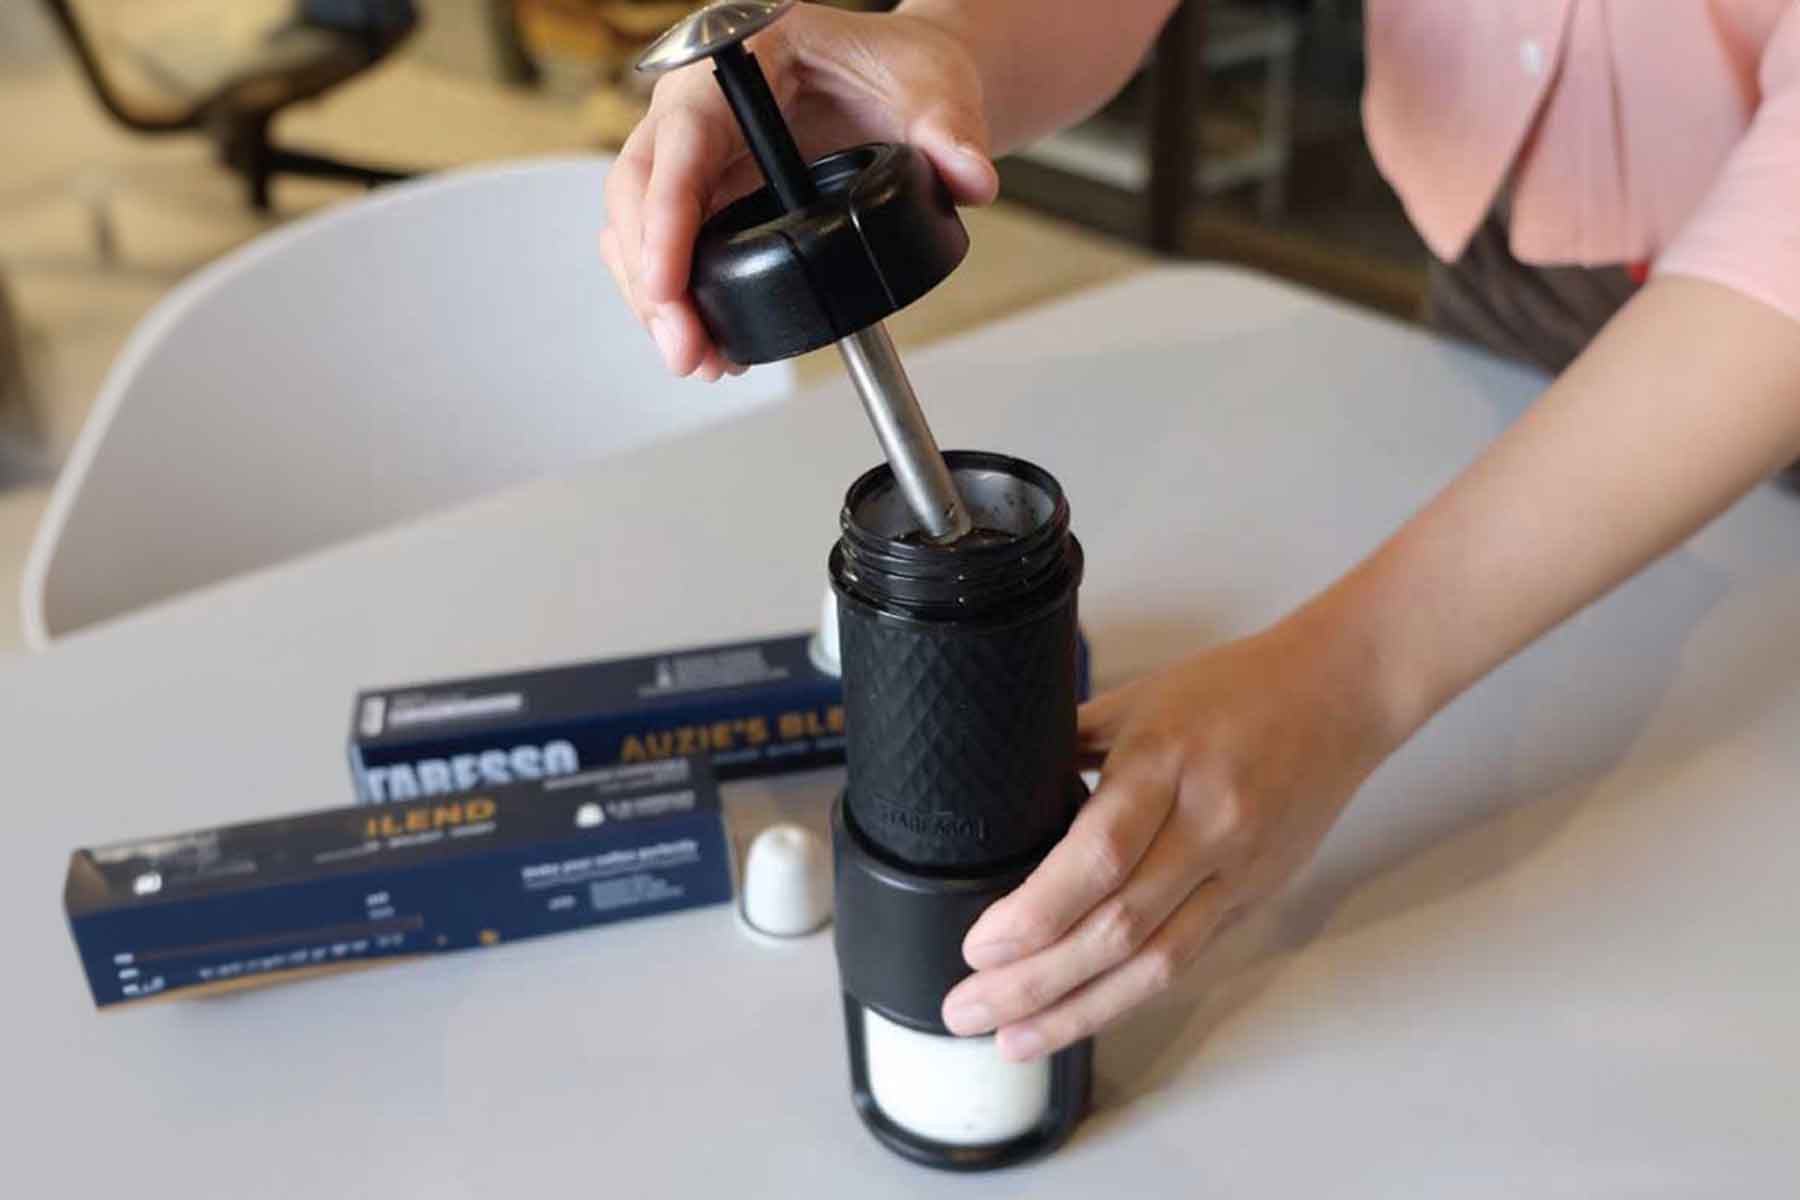 Demonstrating how to open the espresso maker and make delicious on the go coffee.